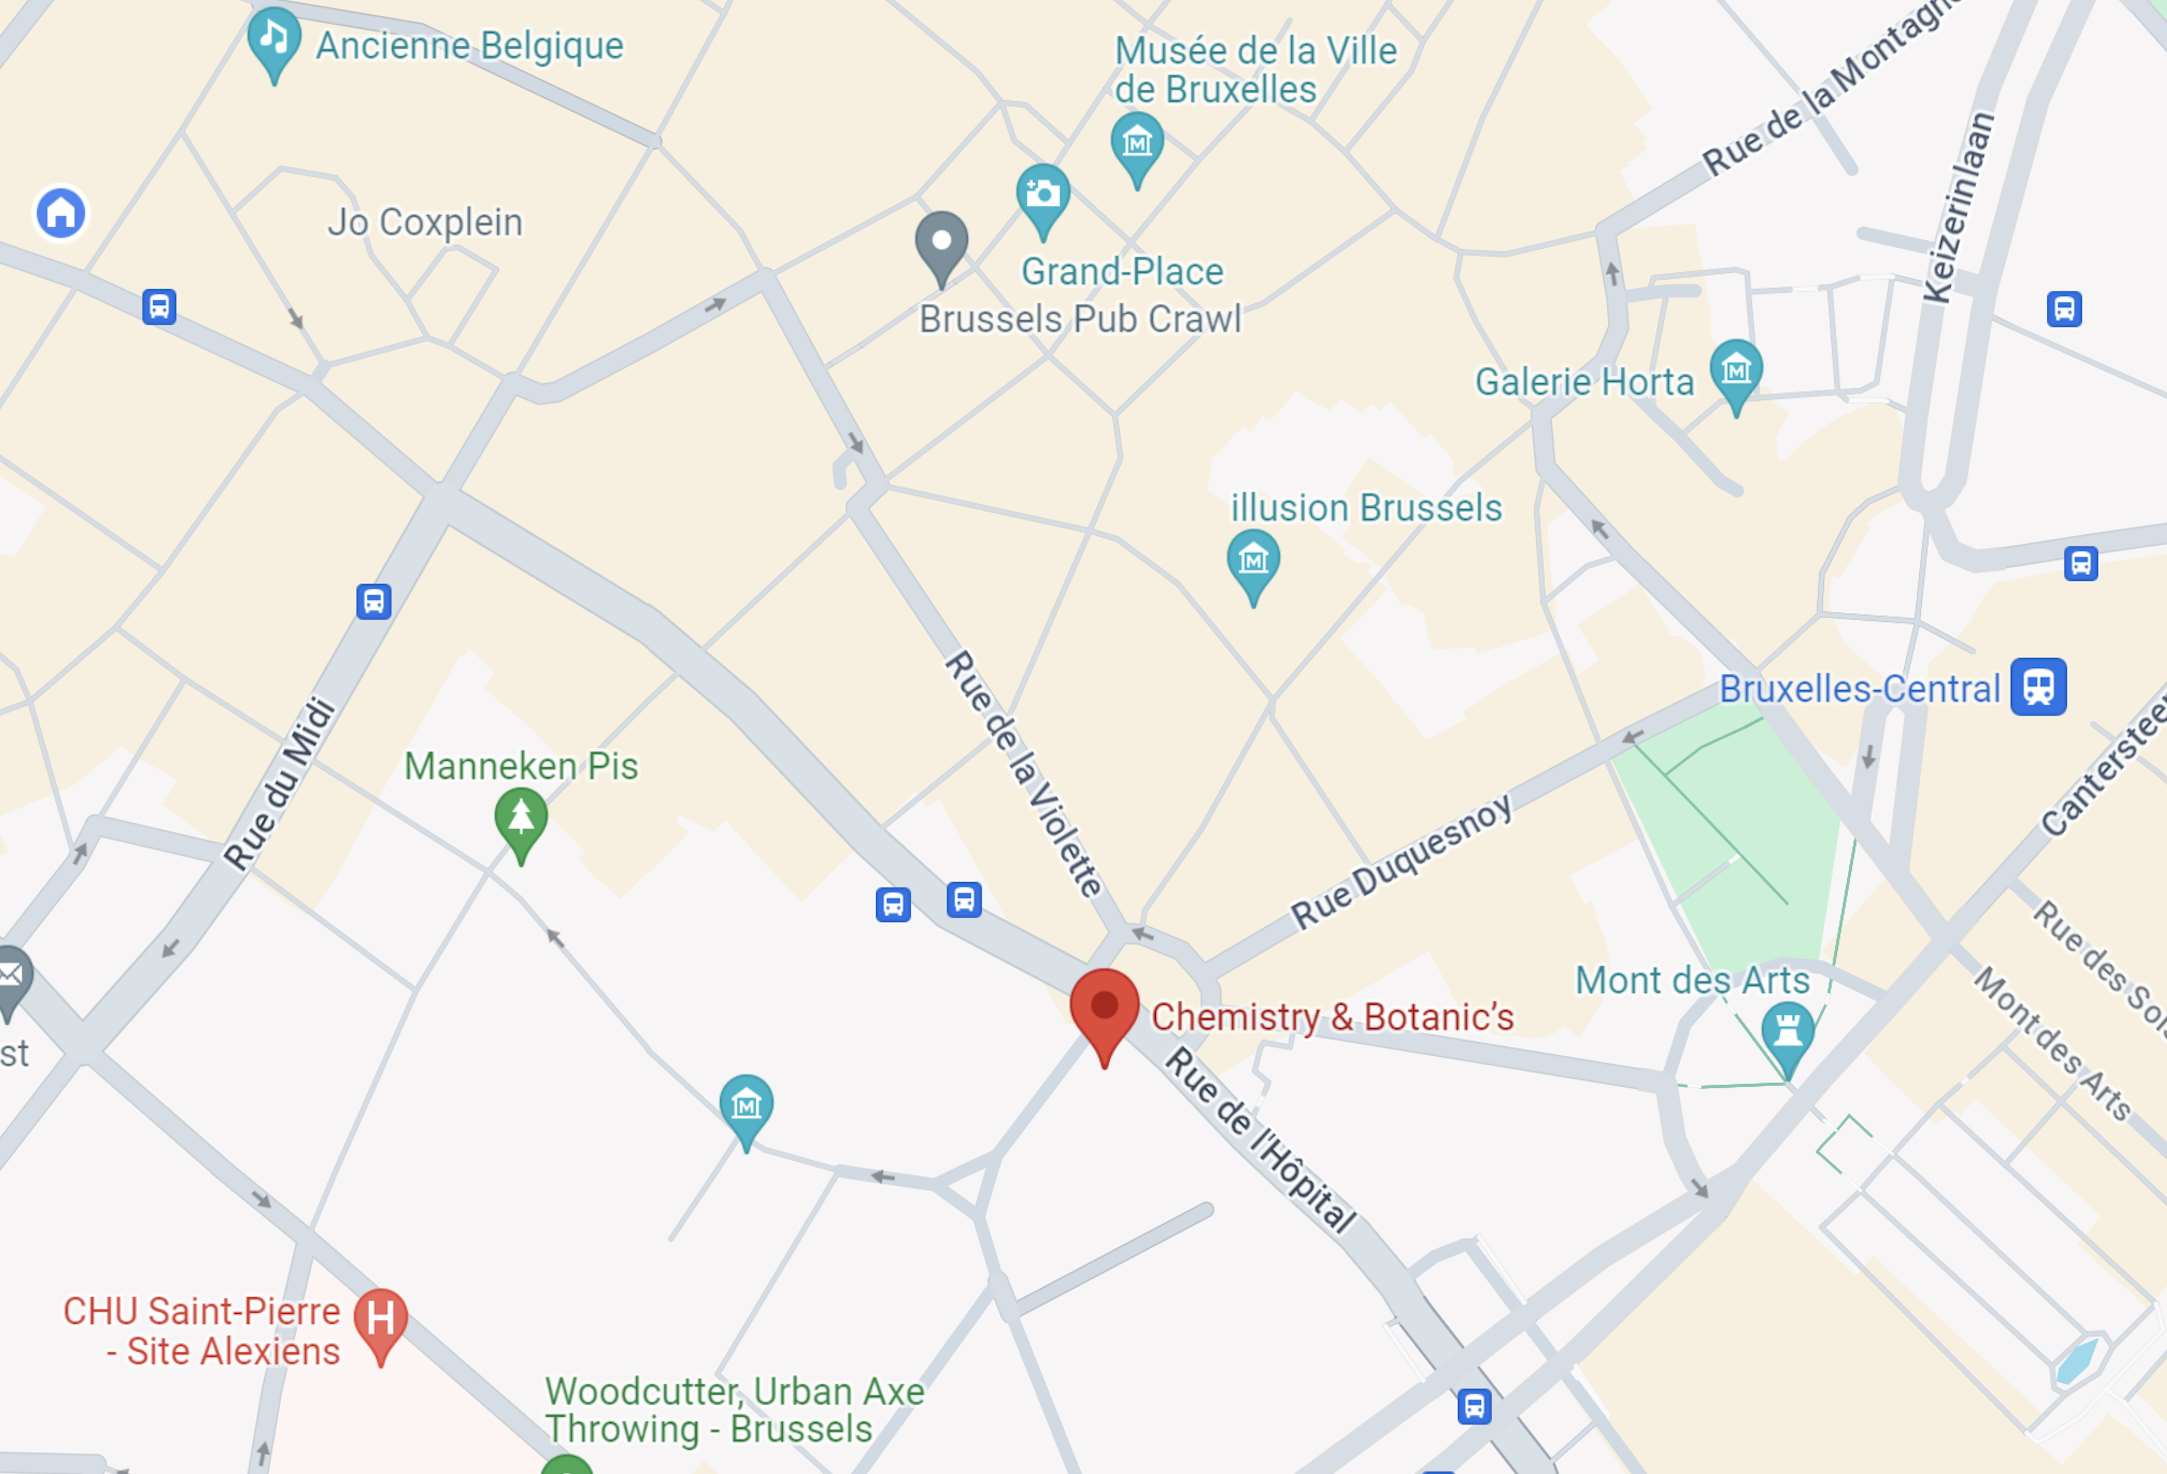 map of tipsy tour starting location brussels